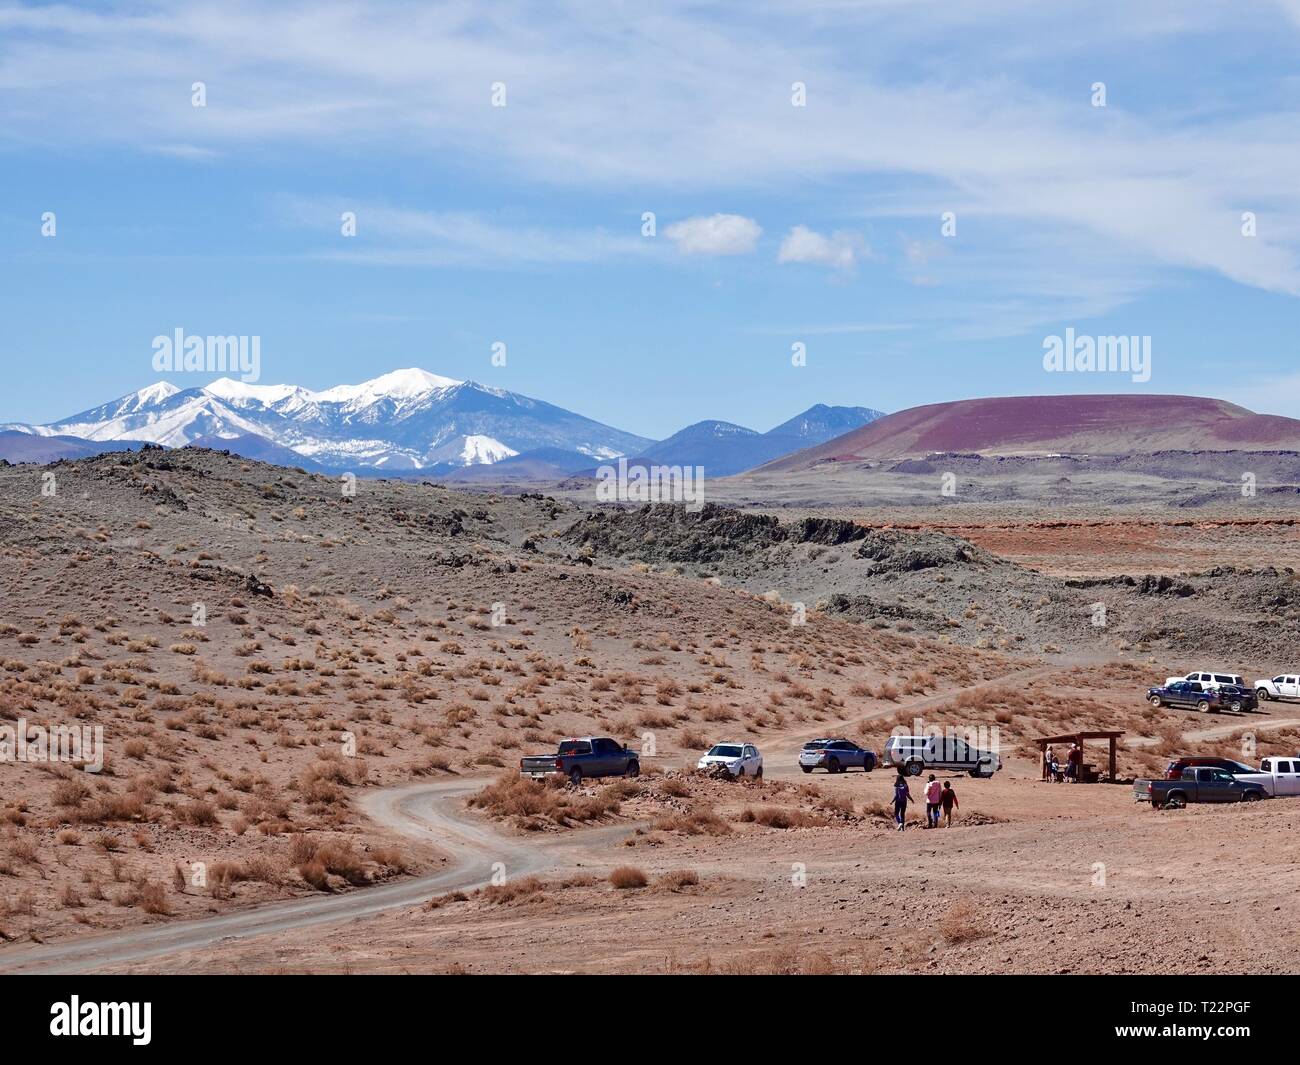 Parked cars and people walking on the Navajo Reservation, NE of Flagstaff, Arizona with snow topped San Francisco peaks in the distance. Stock Photo